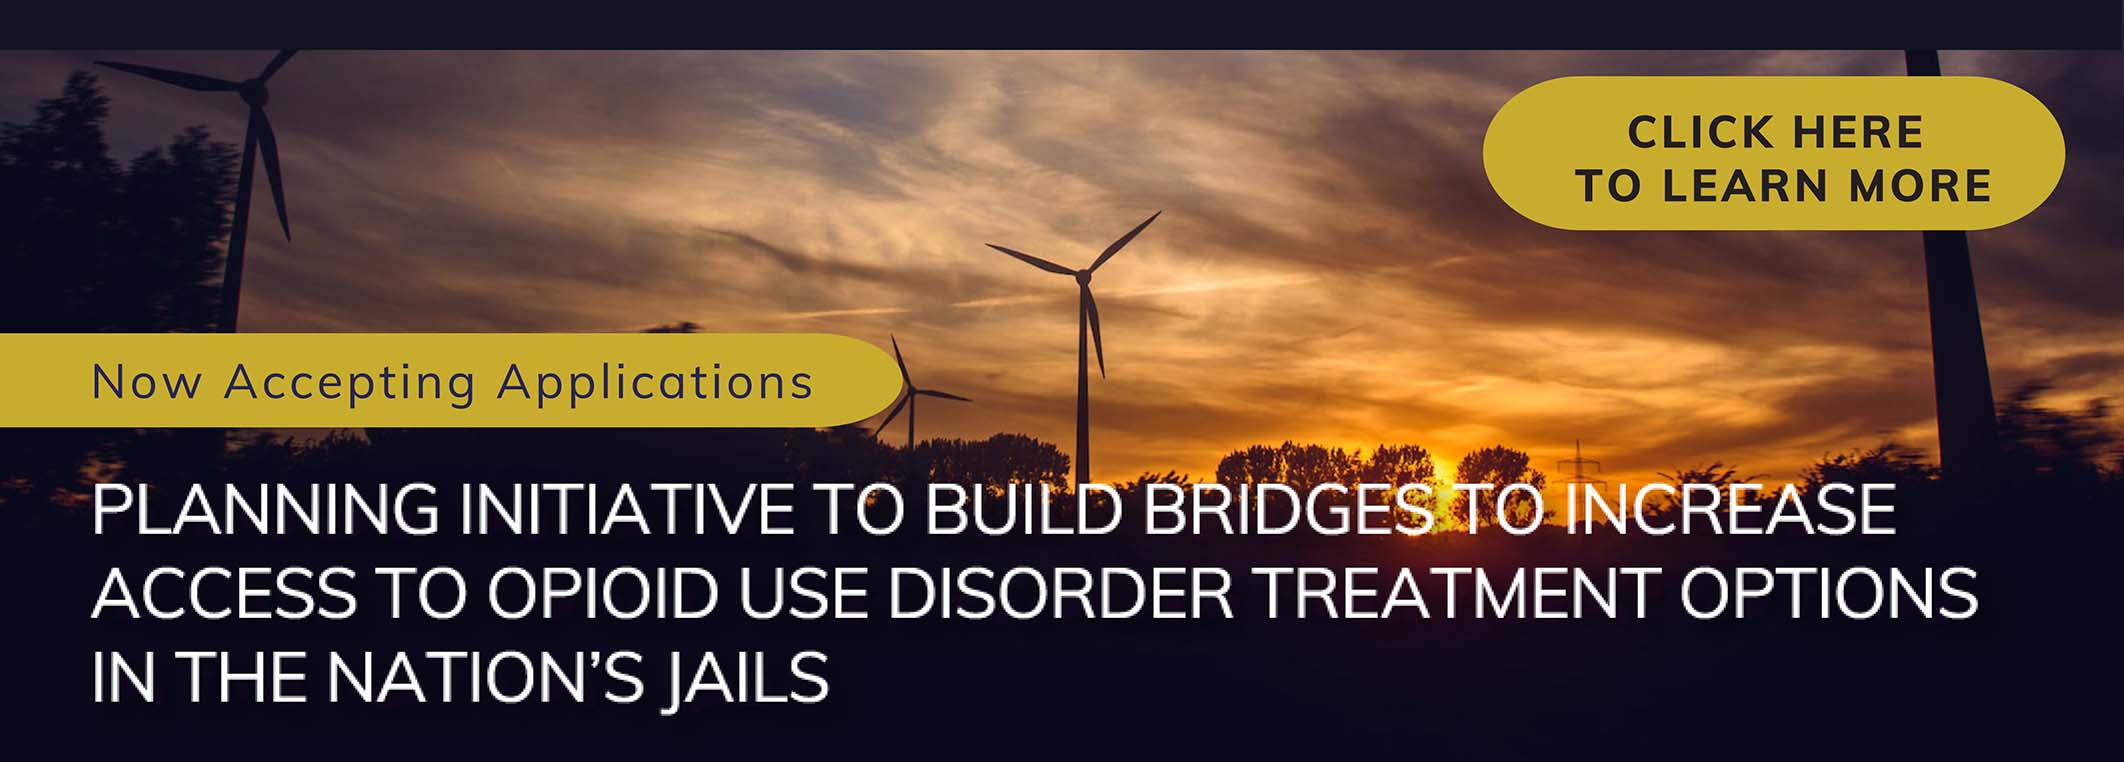 Now Accepting Applications: Planning Initiative to Build Bridges to Increase Access to Opioid Use Disorder Treatment Options in the Nation's Jails